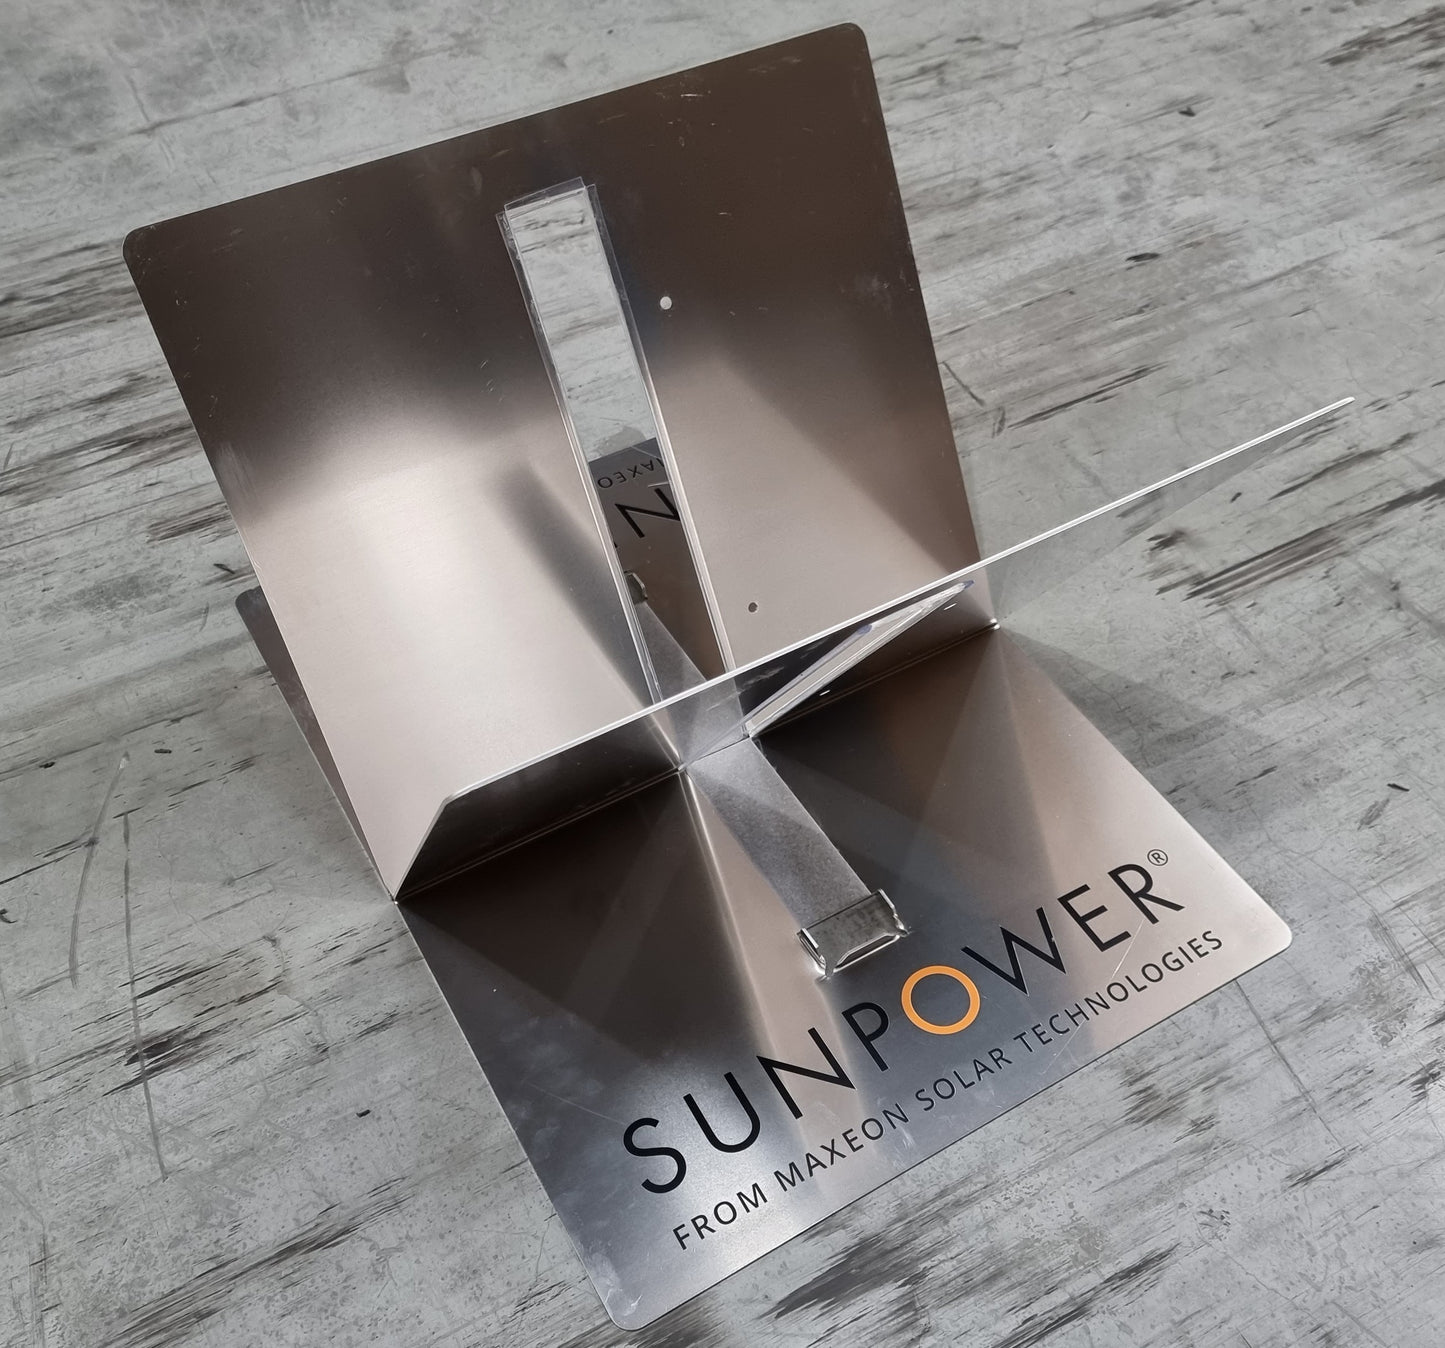 SunPower Solar Panel Display Stands - PRICE DISCOUNTED as no panel protection included